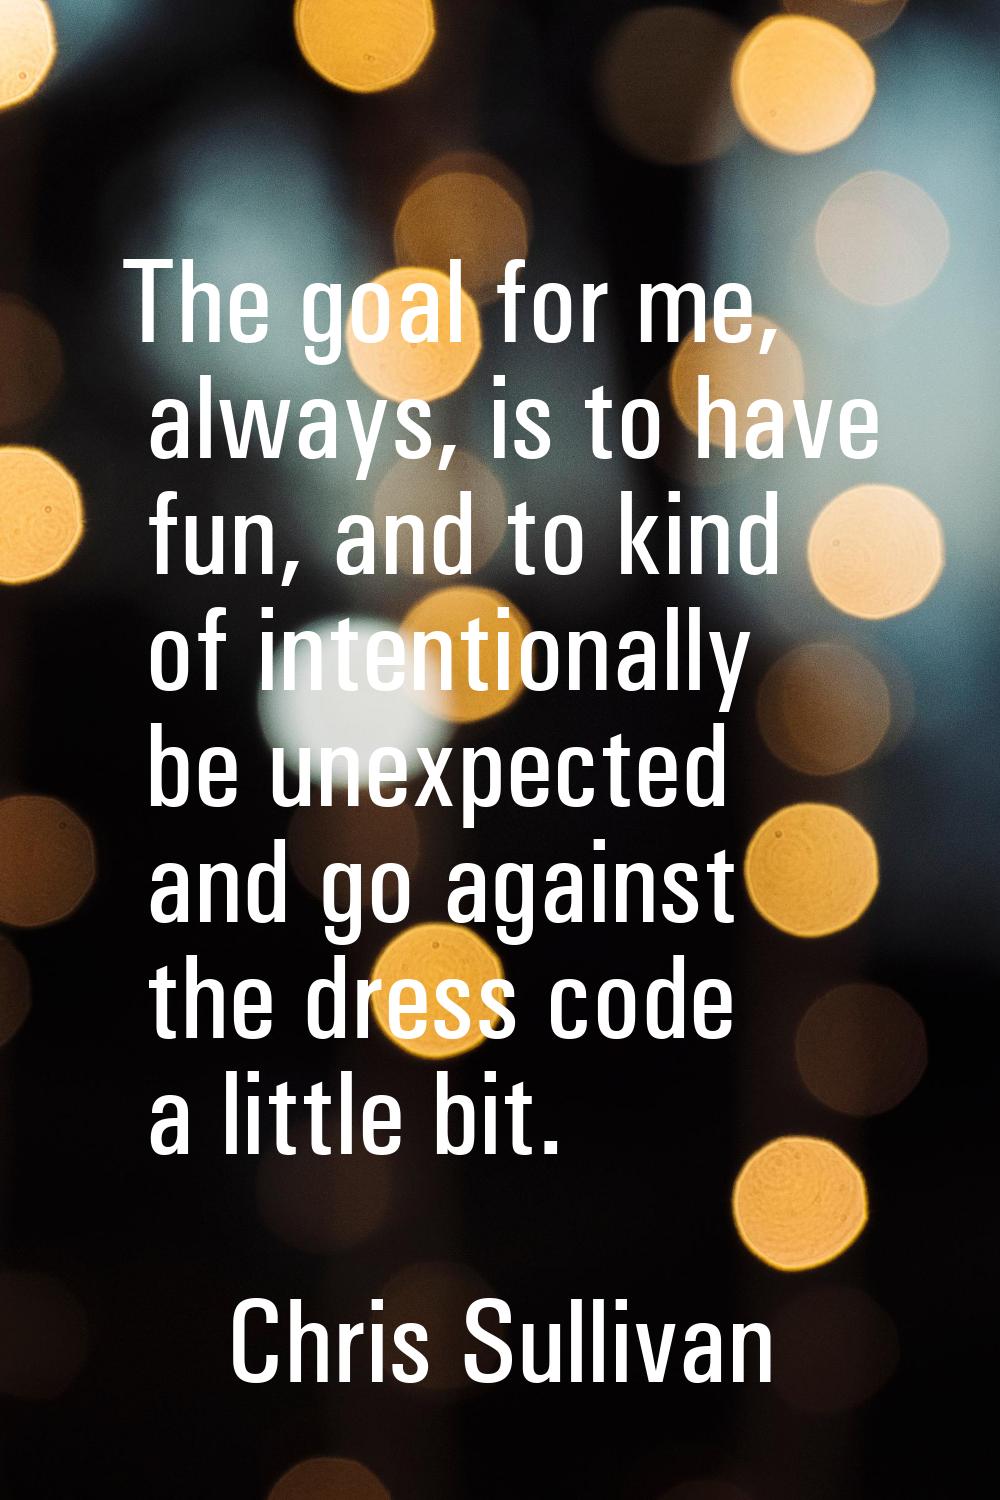 The goal for me, always, is to have fun, and to kind of intentionally be unexpected and go against 